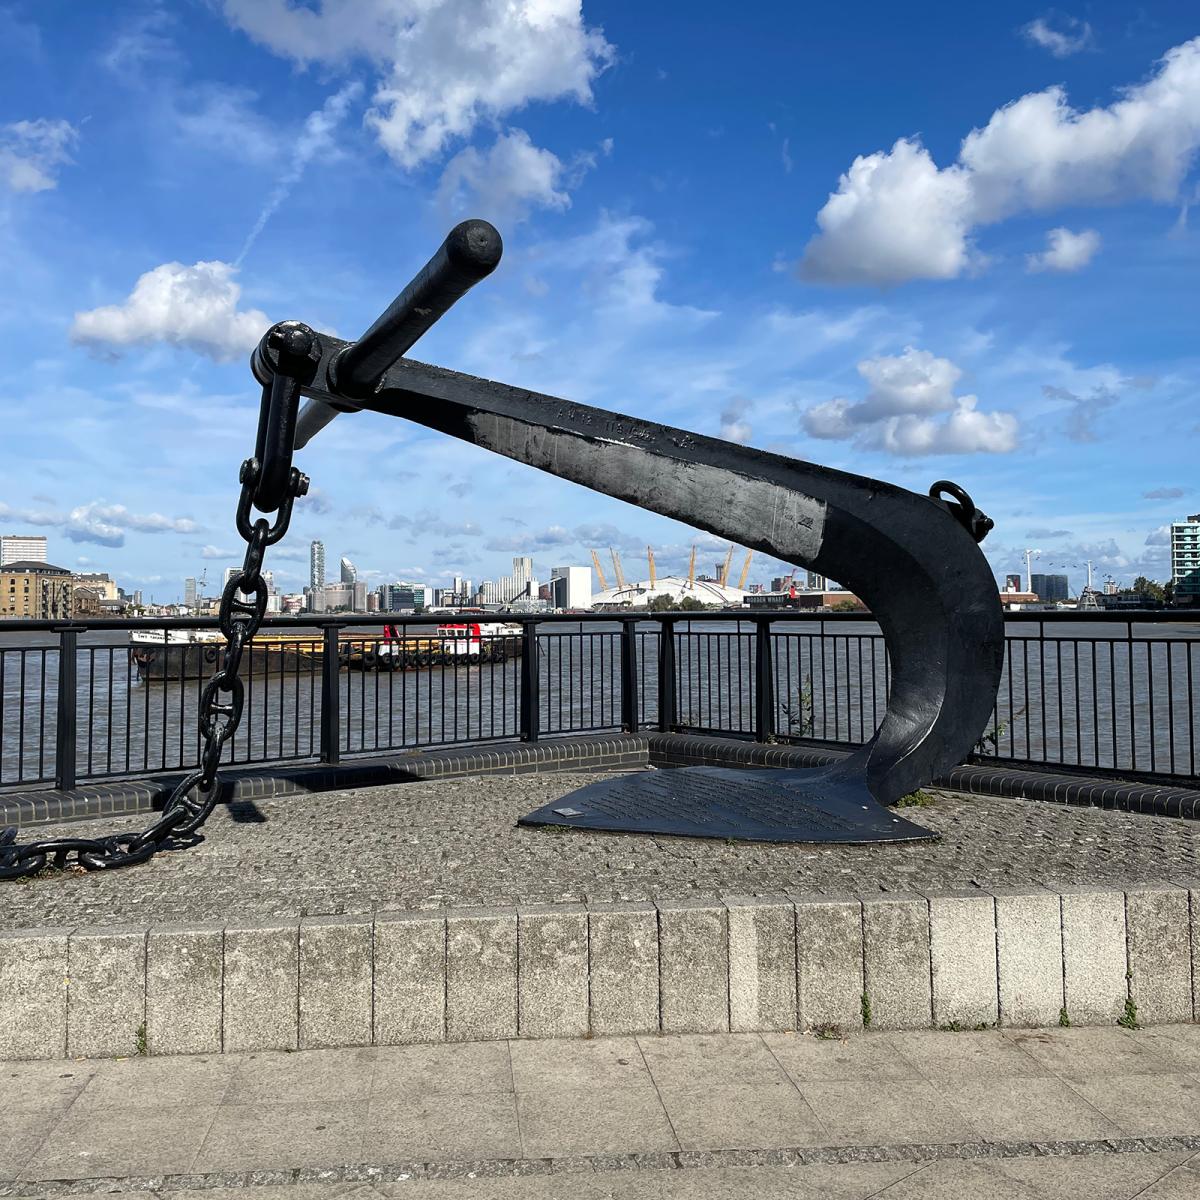 An anchor on display at Anchor Iron Wharf in Greenwich, with the River Thames and O2 in the background